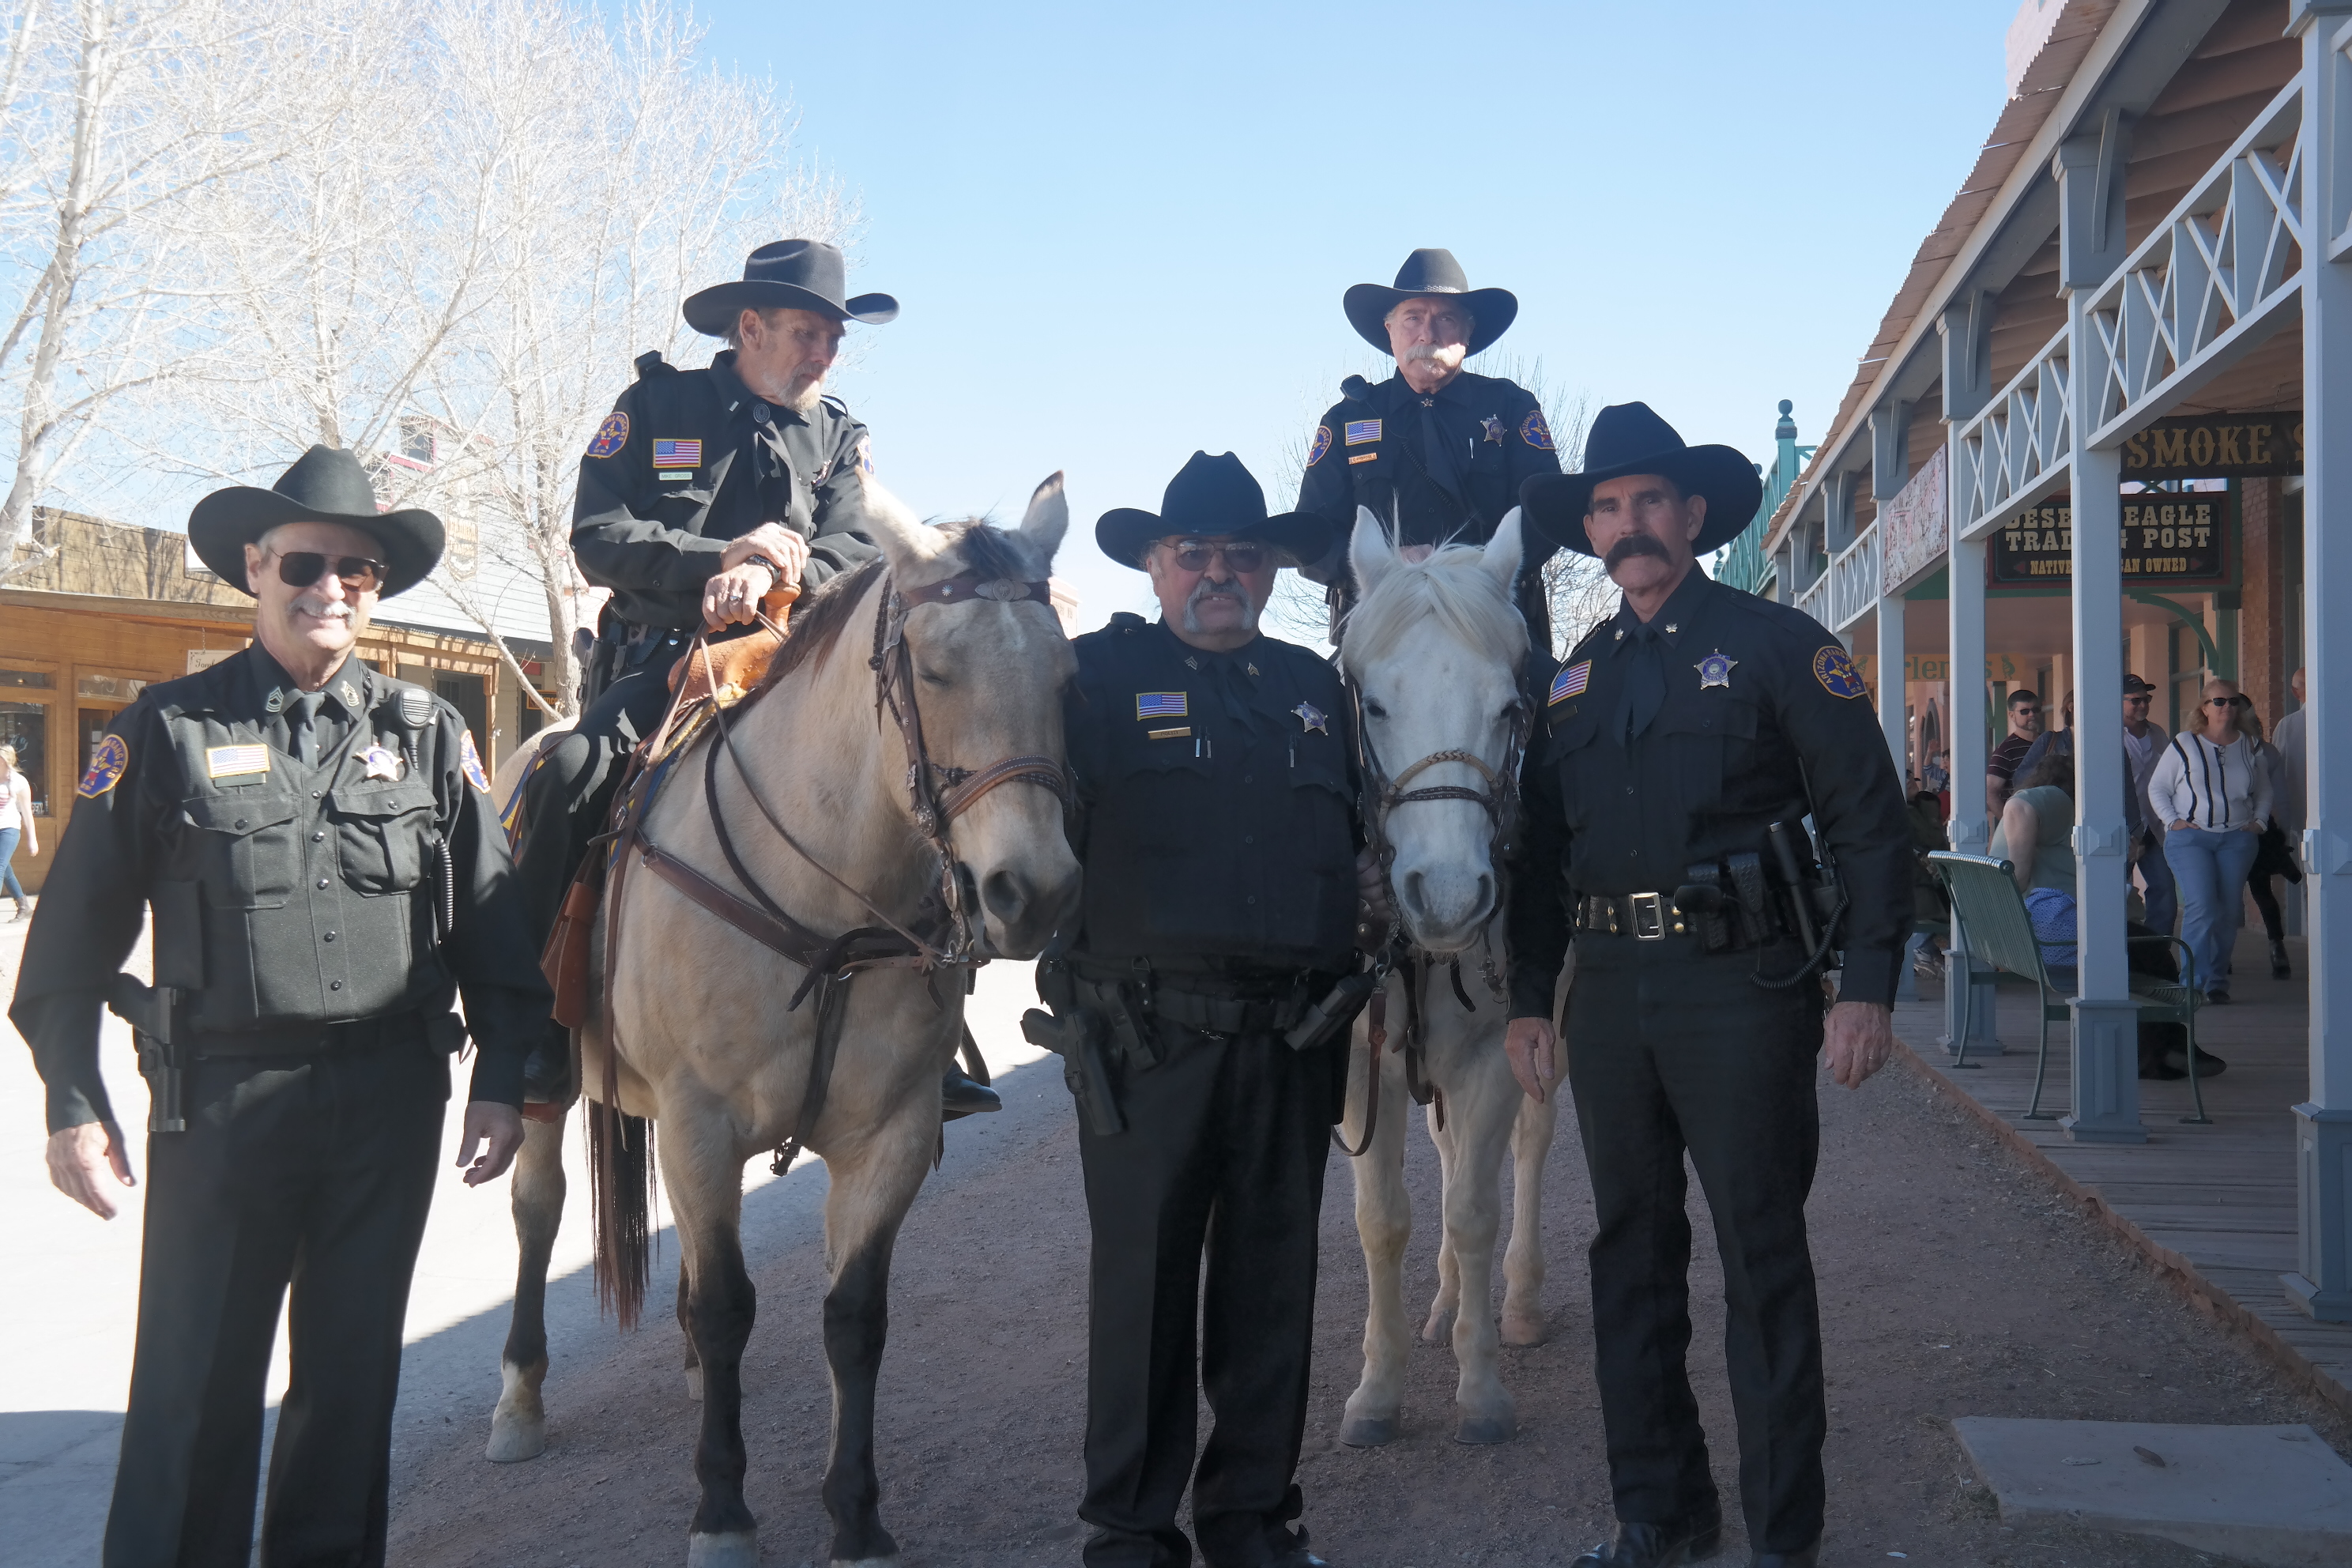 Members of the Arizona Rangers Tombstone Company pose for a picture before starting foot and mounted patrol down historic Allen Street. From left to right: Duty Sgt. Dan Fischer, Lt. Mike Gross, Ranger Jim Politi, Ranger Geno D'Ambrose, Maj. Kenn Barrett. (Photo by: David Mariotte/ Tombstone Epitaph)